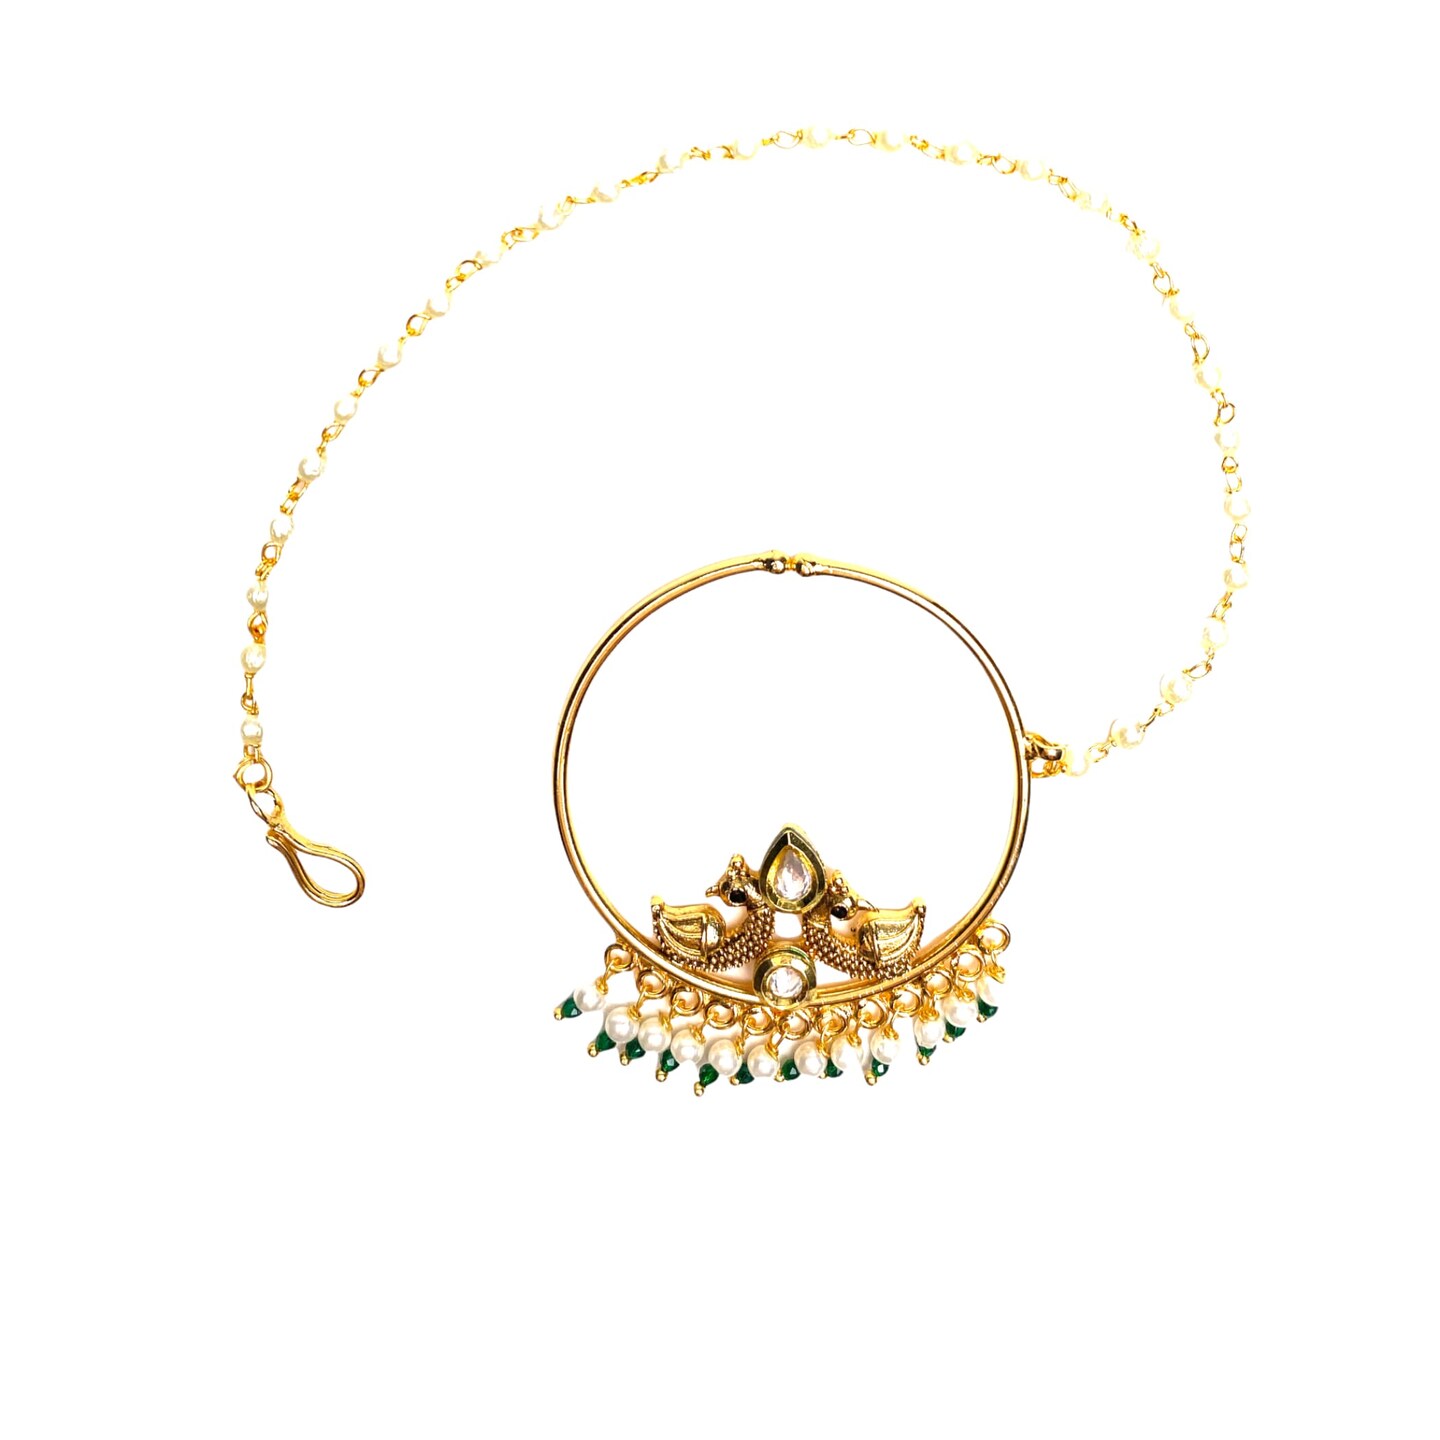 Indian Gold Necklace - Turn Heads With This Gorgeous Piece | Virani Jewelers